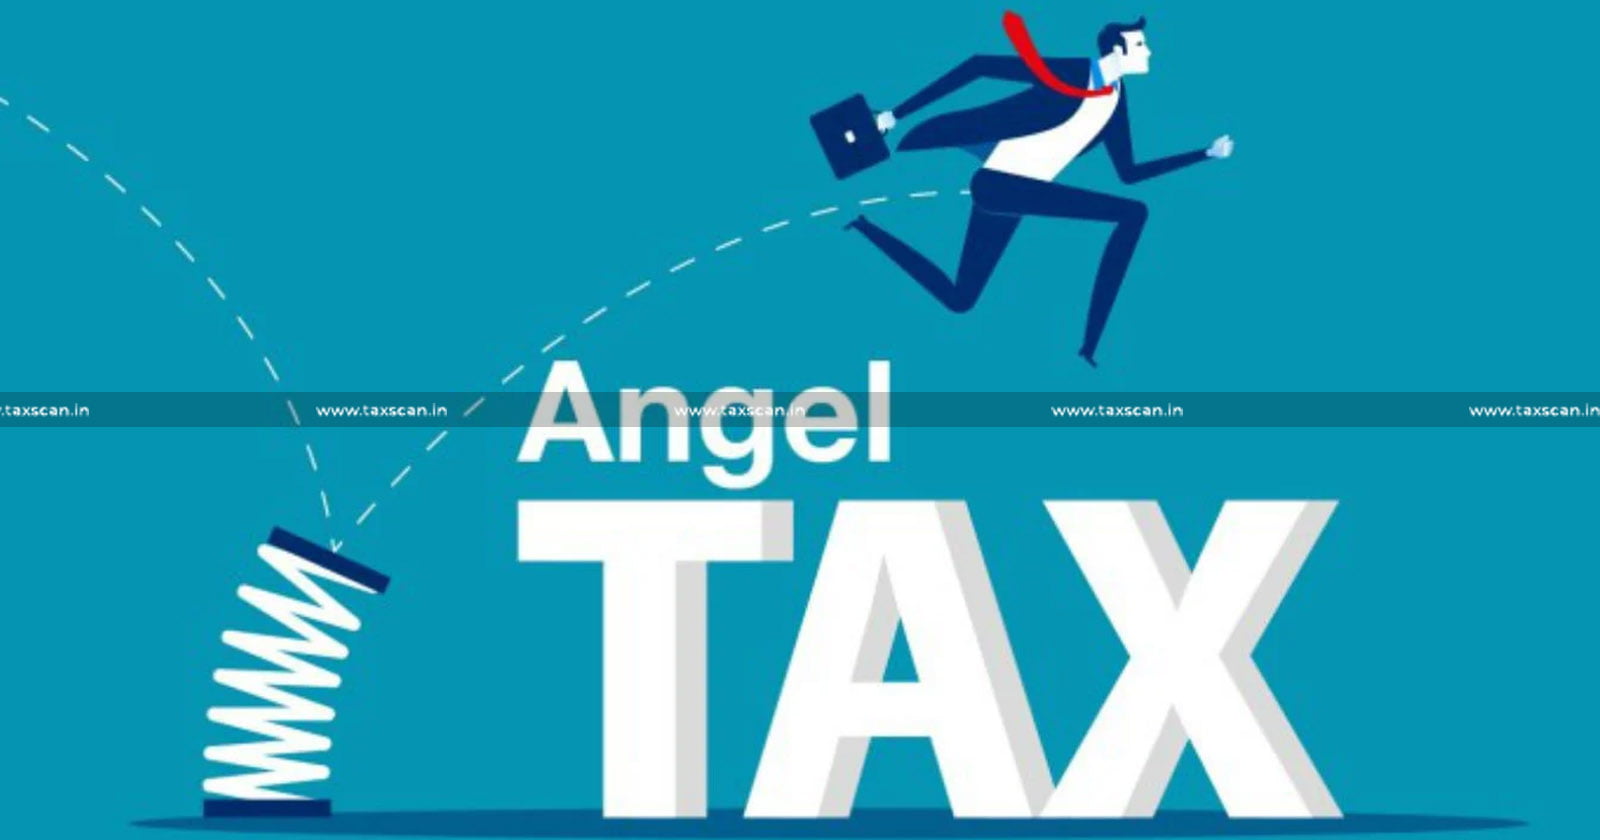 CBDT proposes changes - CBDT - Angel Tax - CBDT proposes changes to Rule on Angel Tax - Excluded Entities - Taxscan